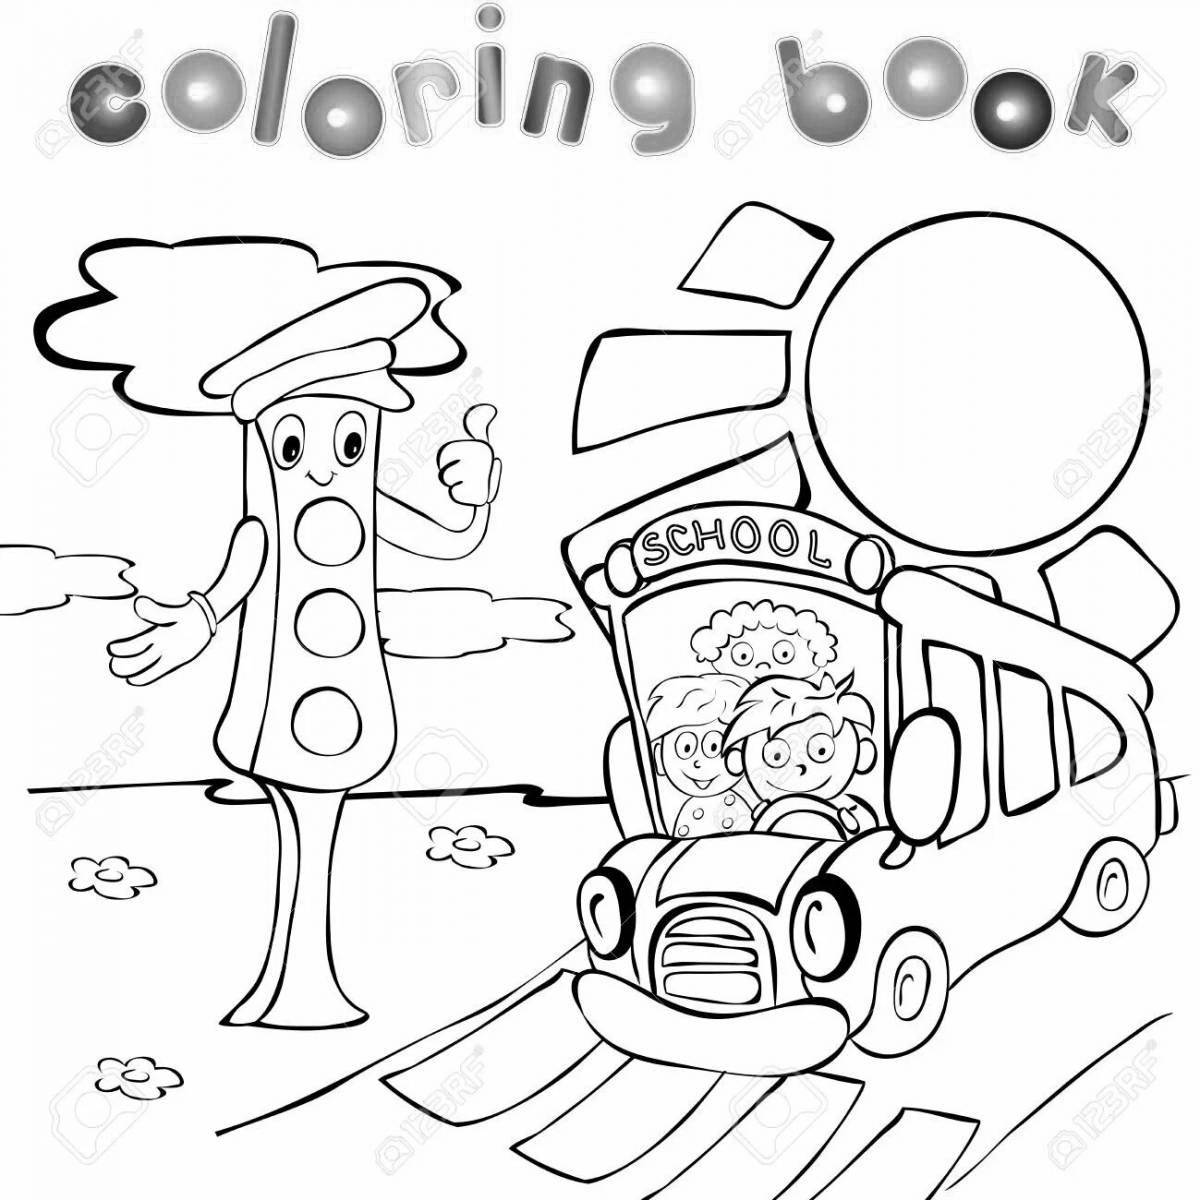 Colored adventure coloring pages of my dad and me for safer roads